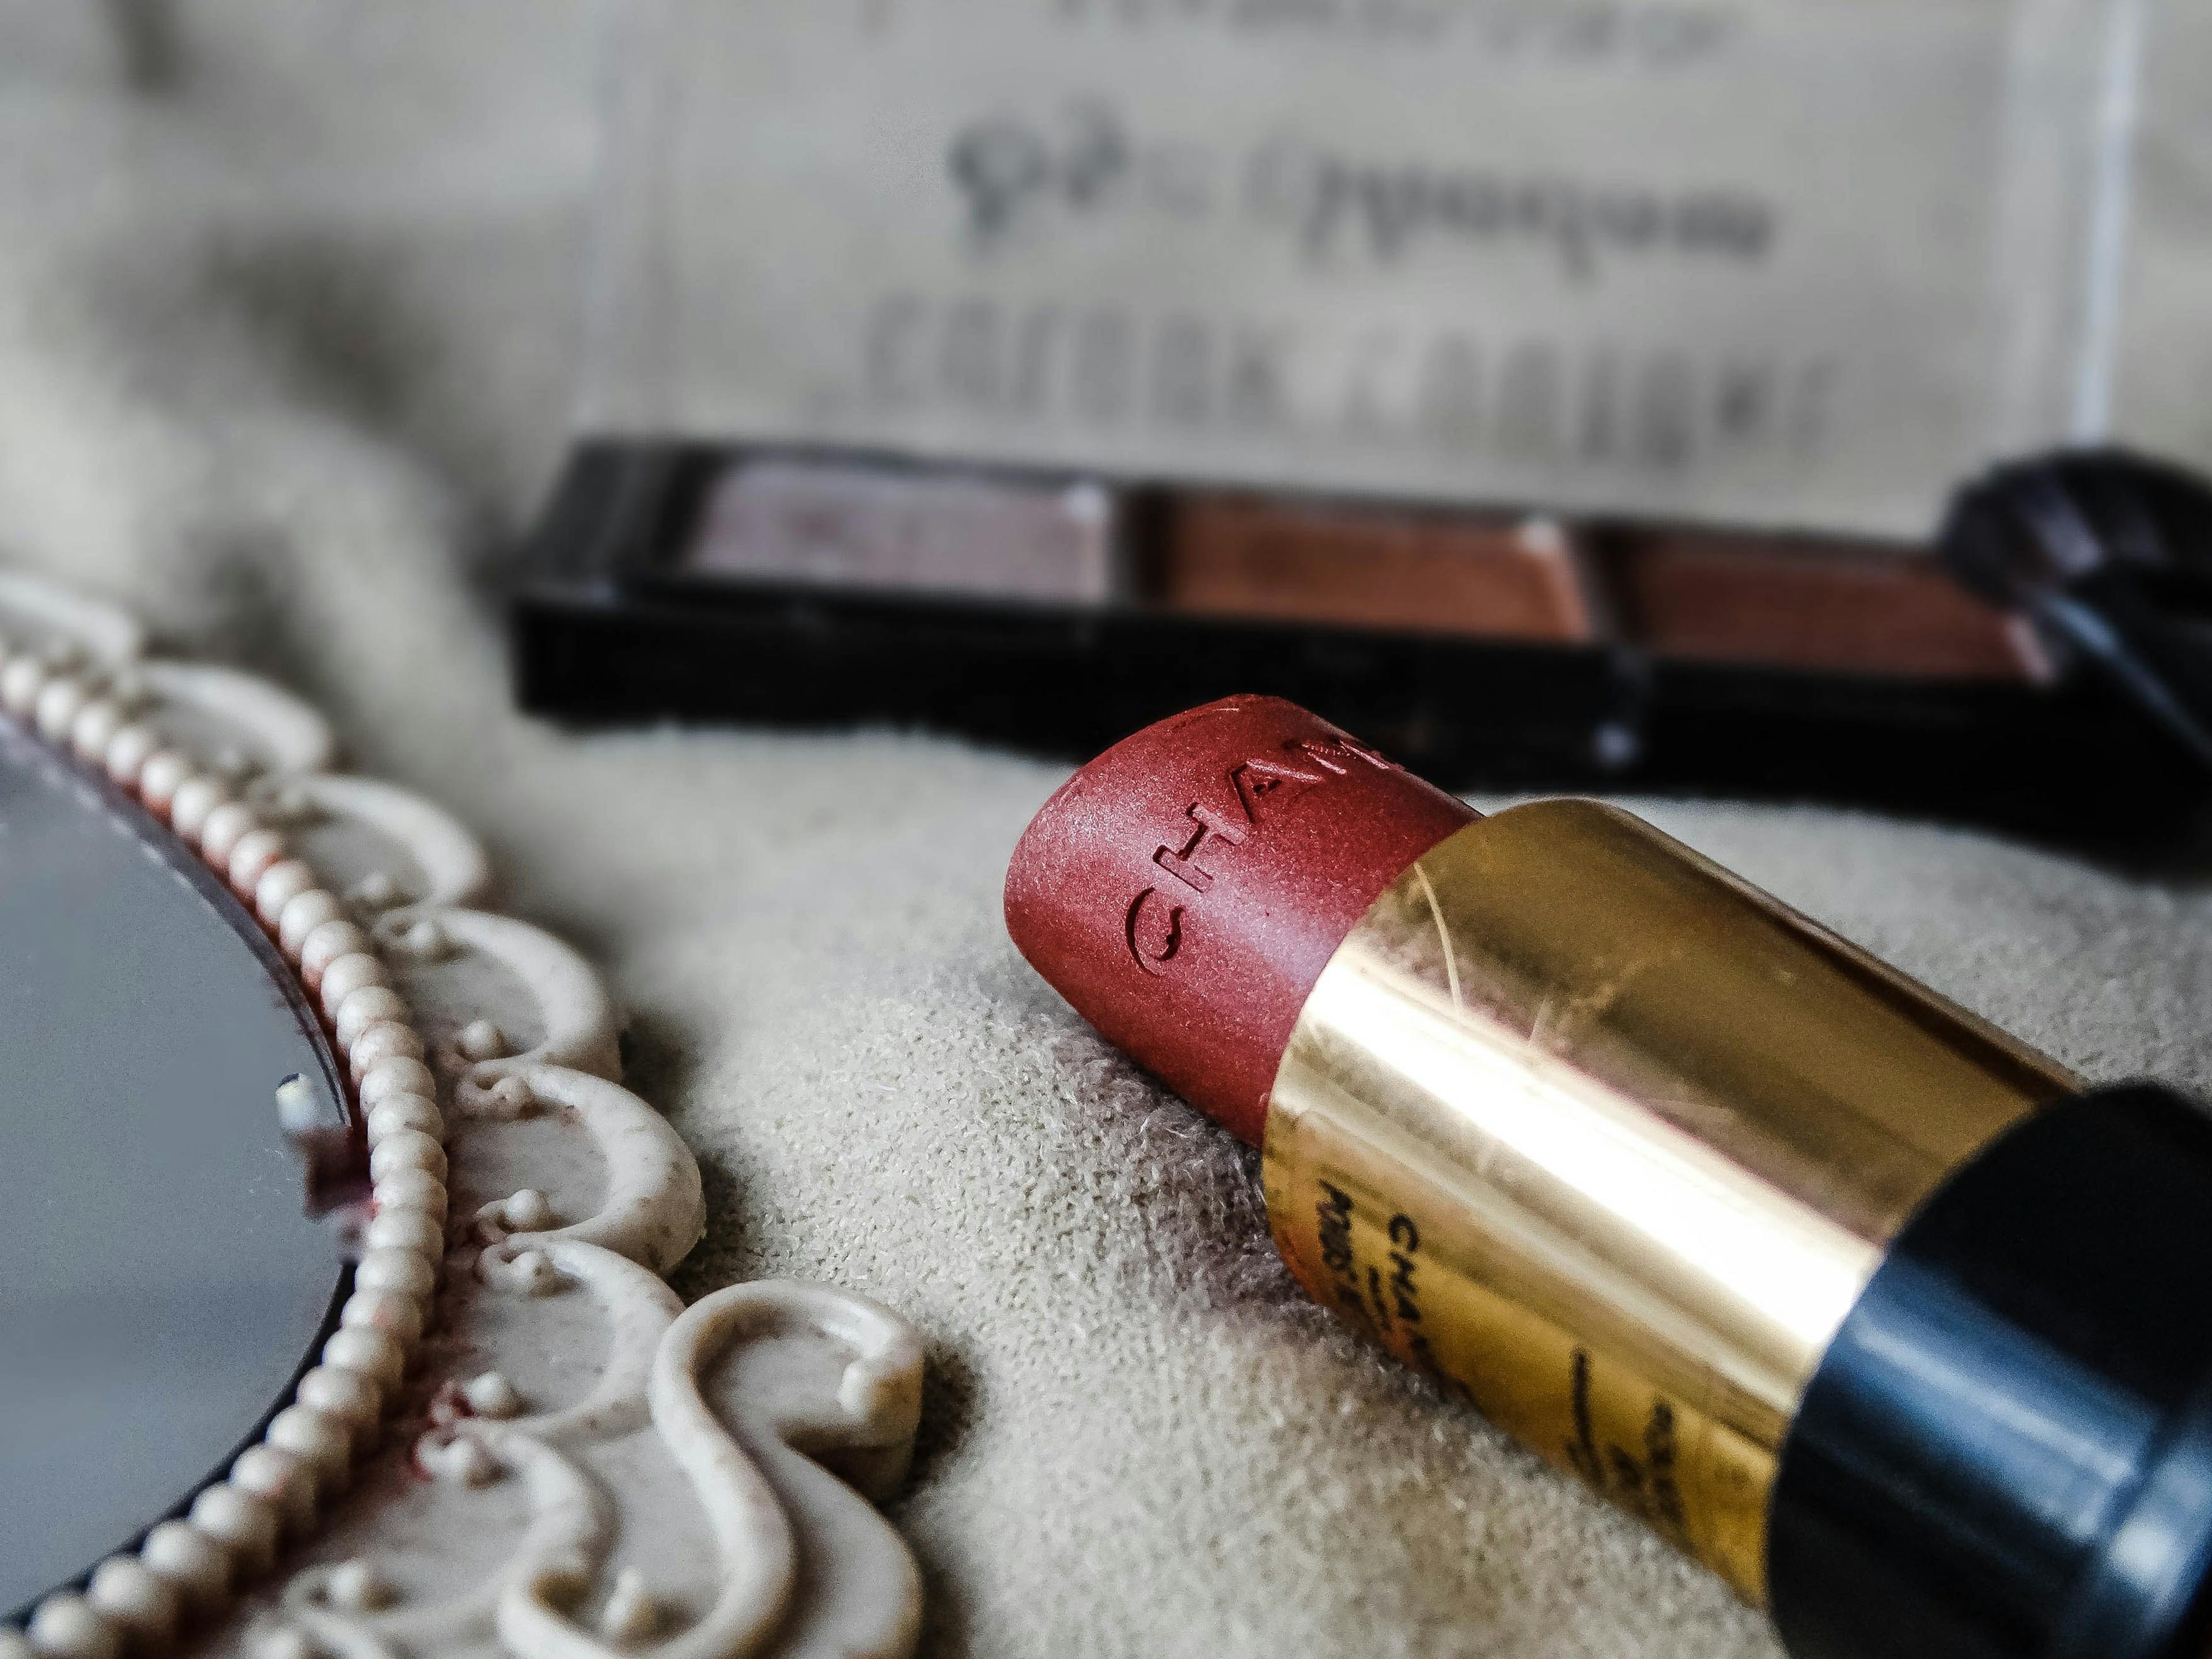 A lipstick branded Chanel focused on the image. 